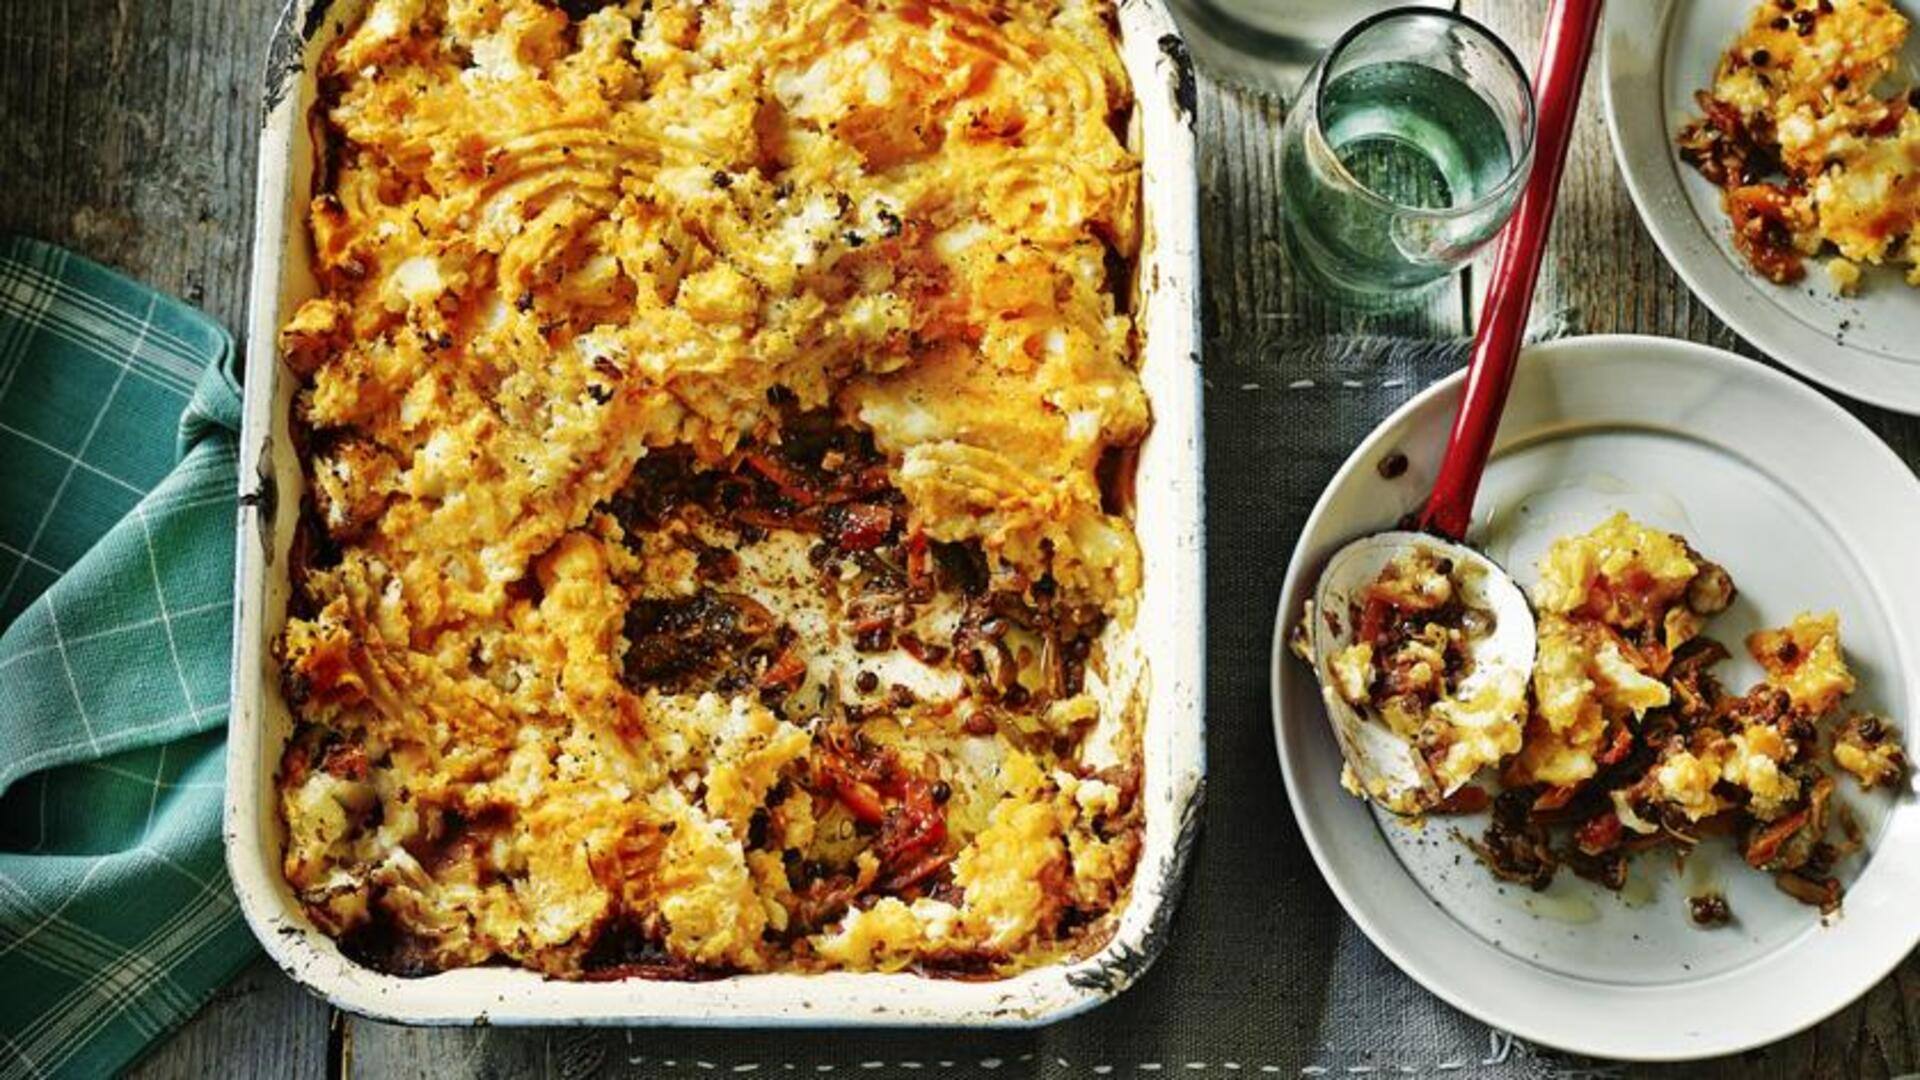 Try this vegetarian shepherd's pie recipe for a flavorsome day